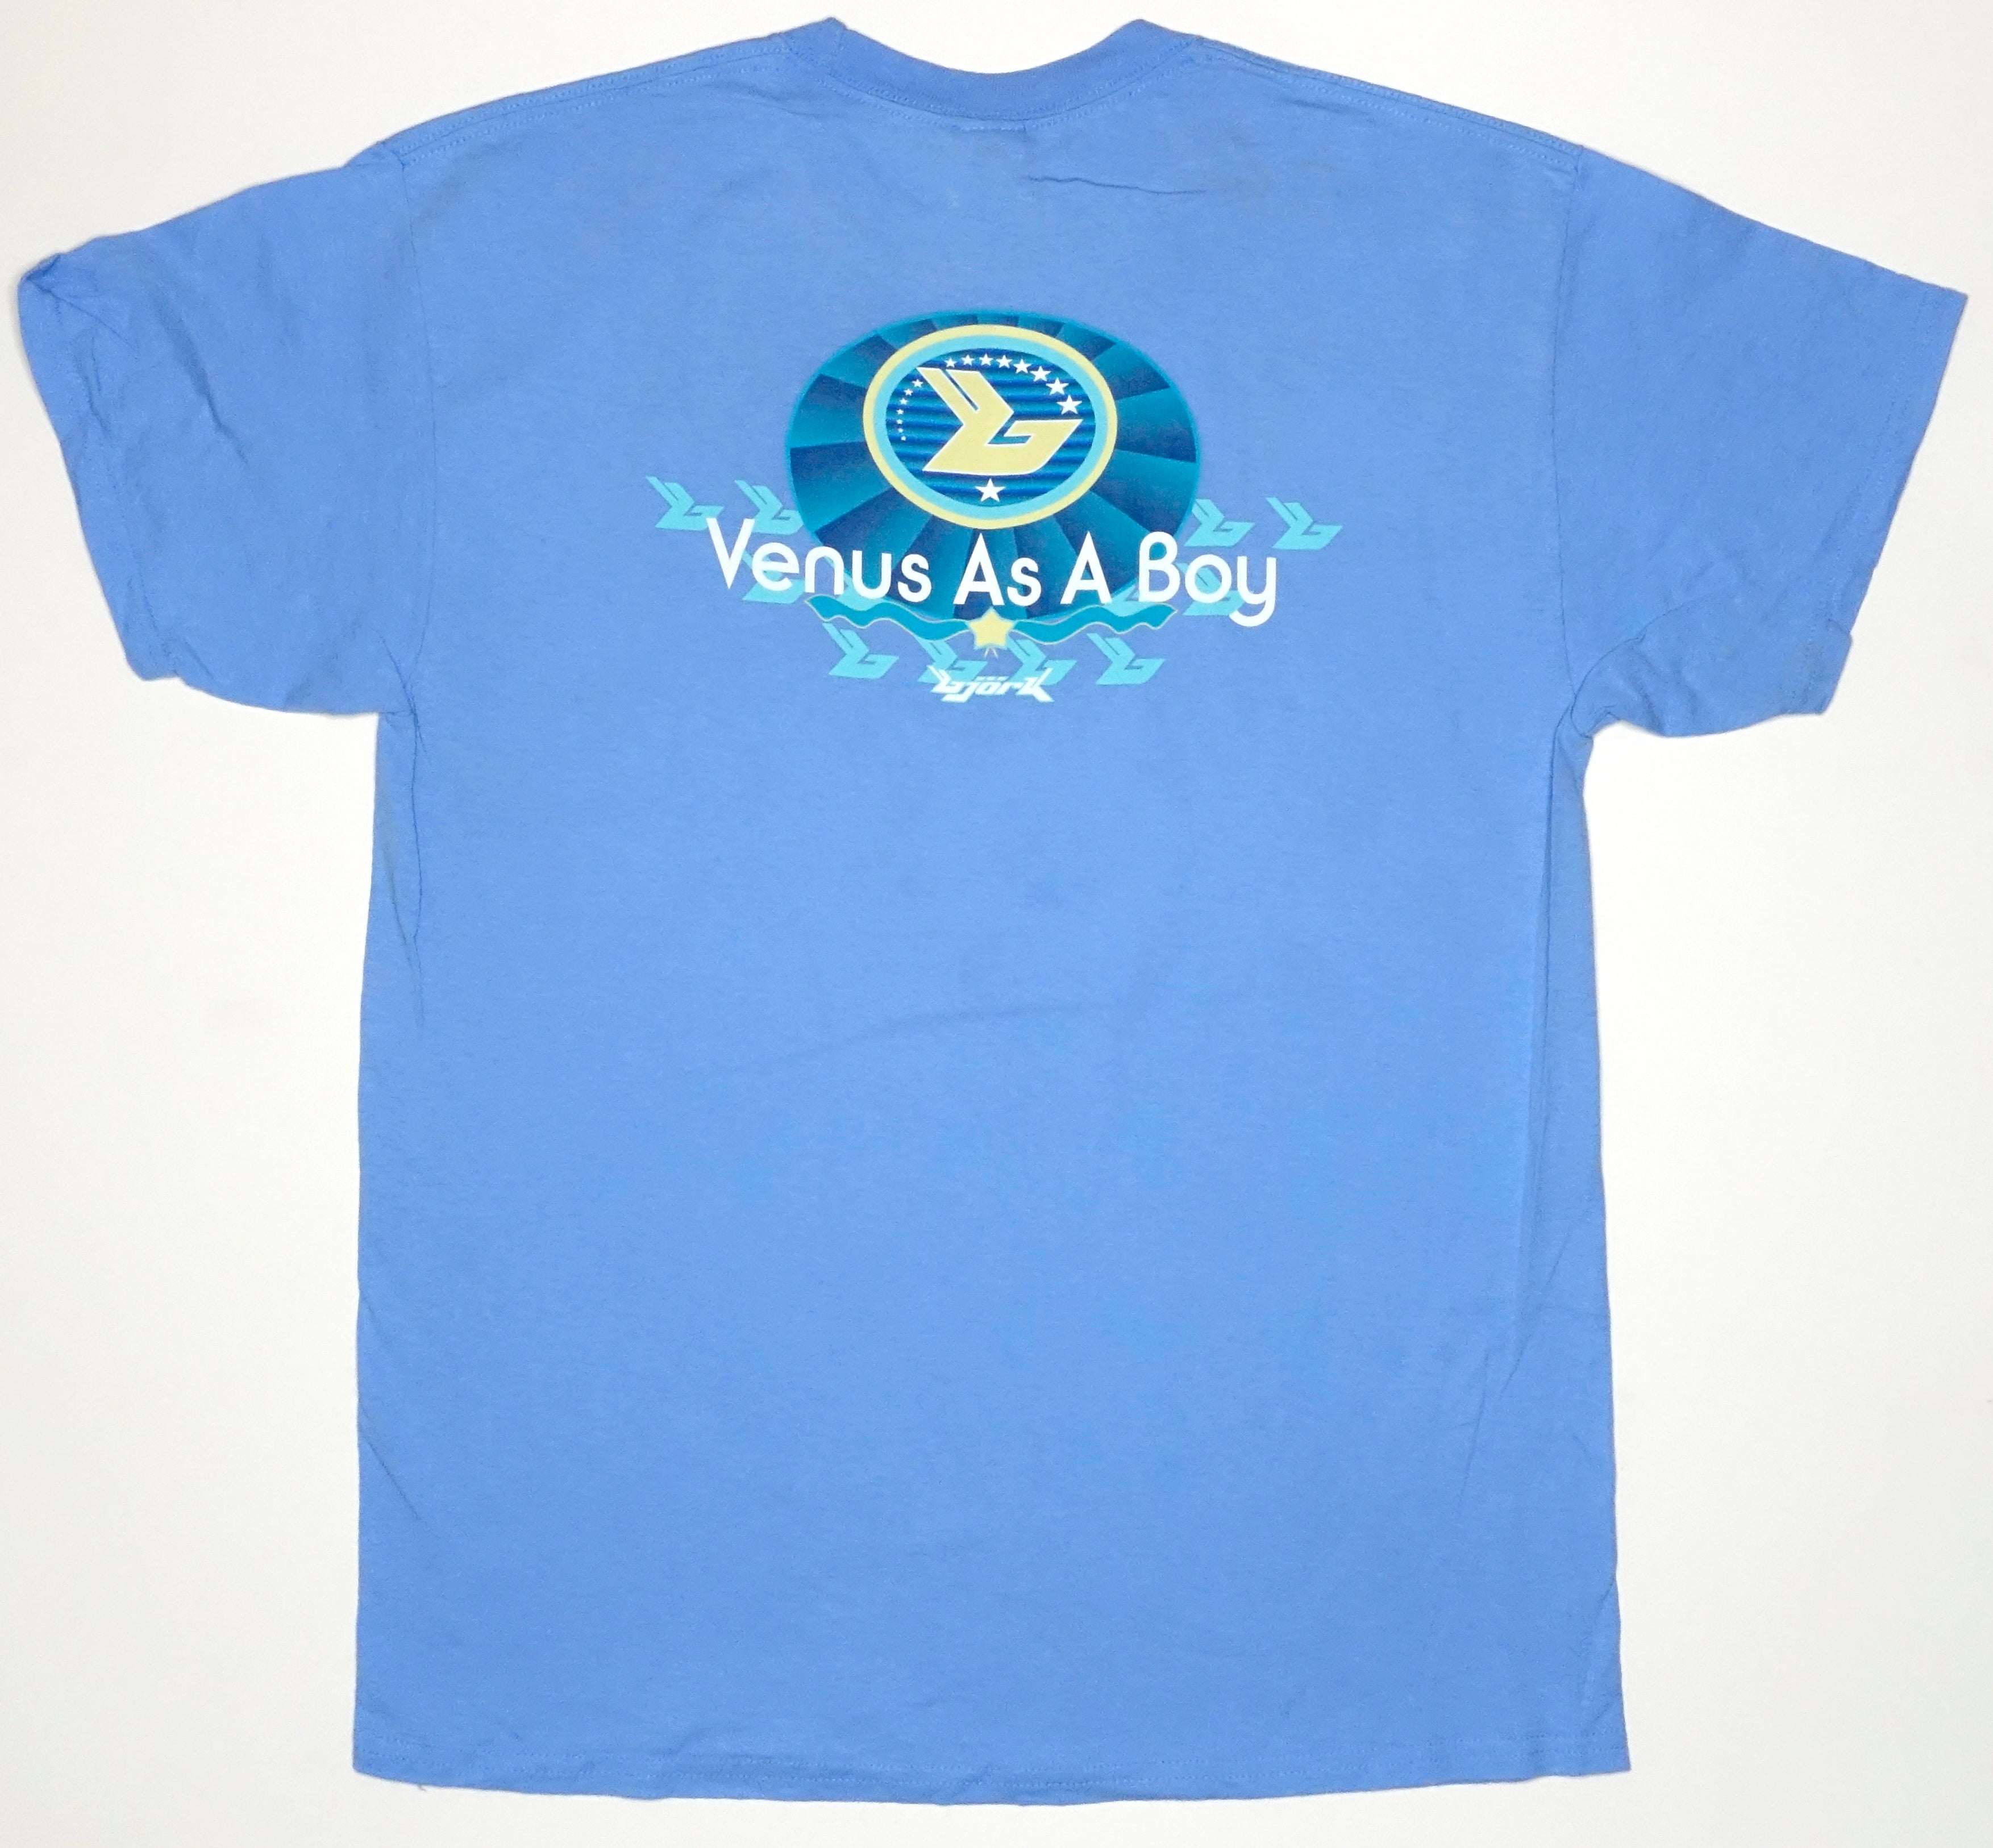 Björk - Venus As A Boy One Little Indian Reproduction Shirt Size Large